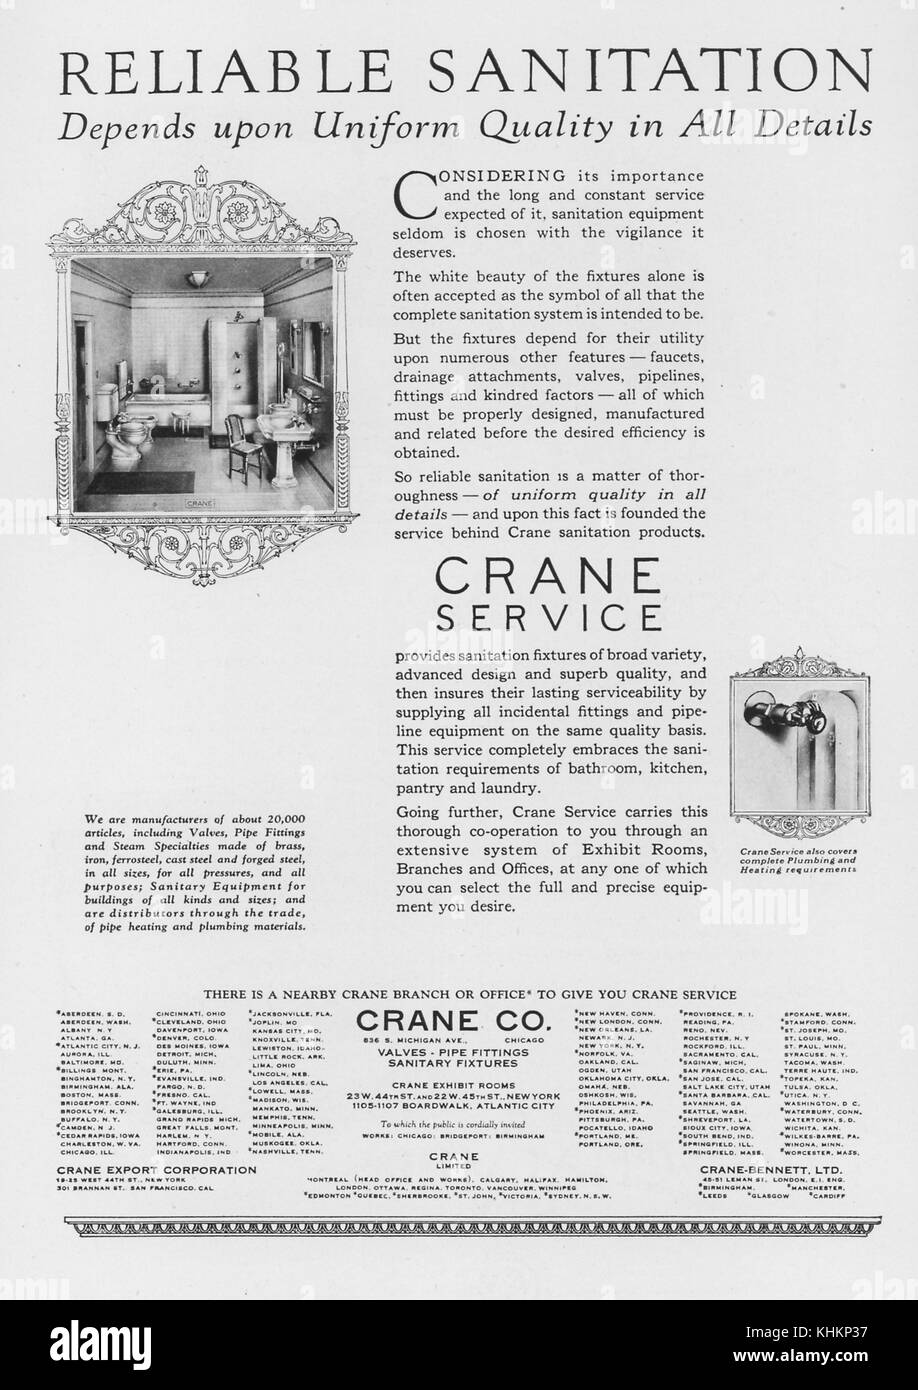 Full page advertisement for the Crane Company of Chicago, titled Reliable Sanitation Depends Upon Uniform Quality in All Details, featured in National Geographic Magazine, July, 1922. Stock Photo